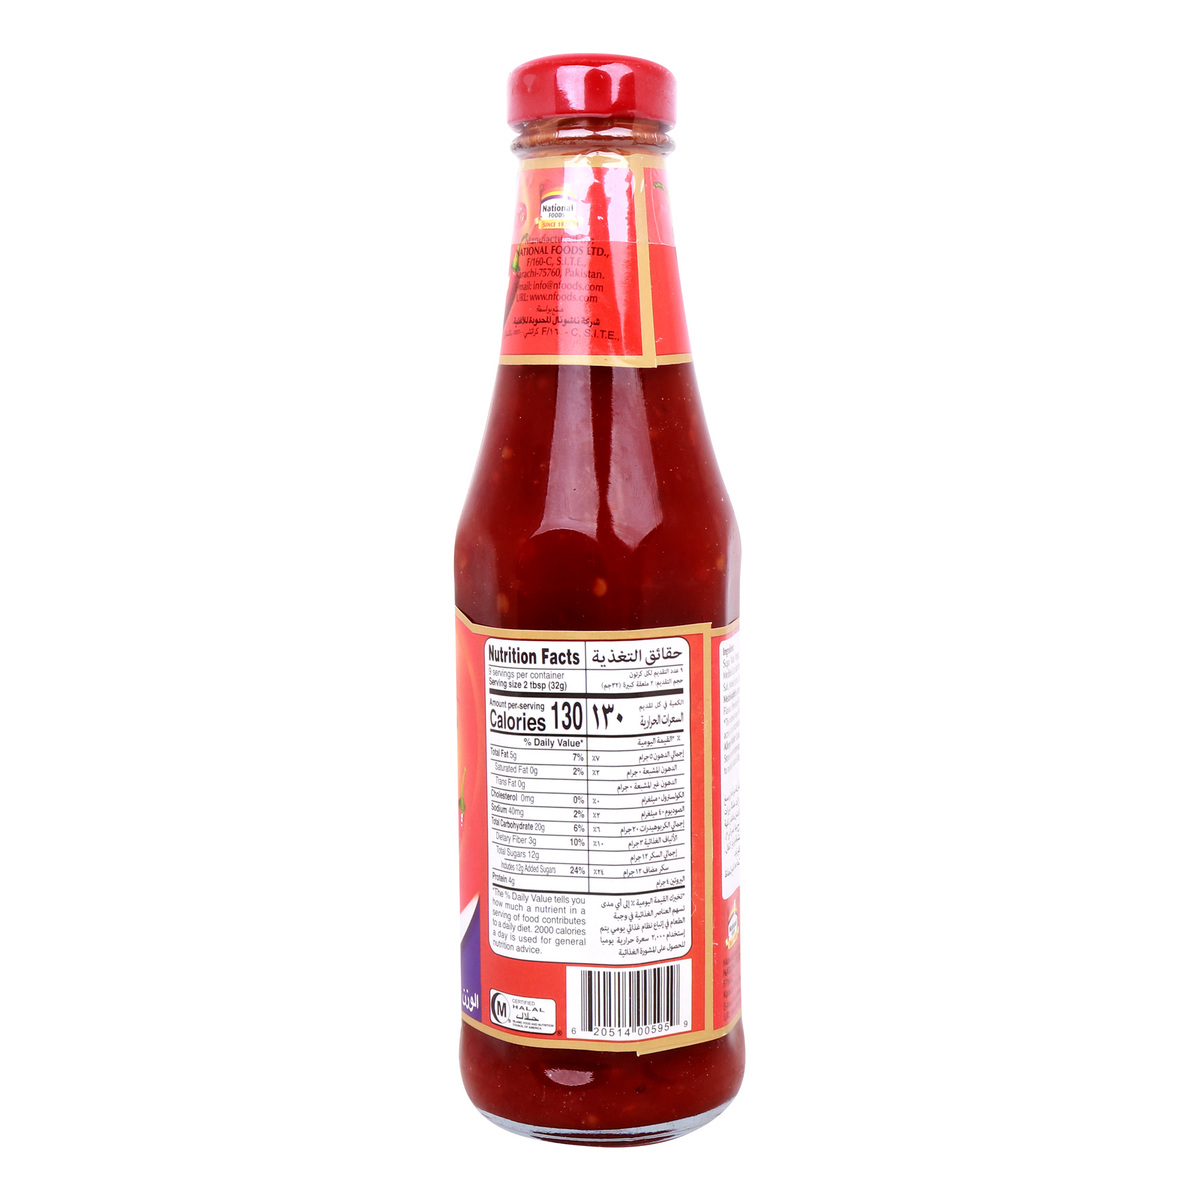 National Red Chilli Sauce, 300 g